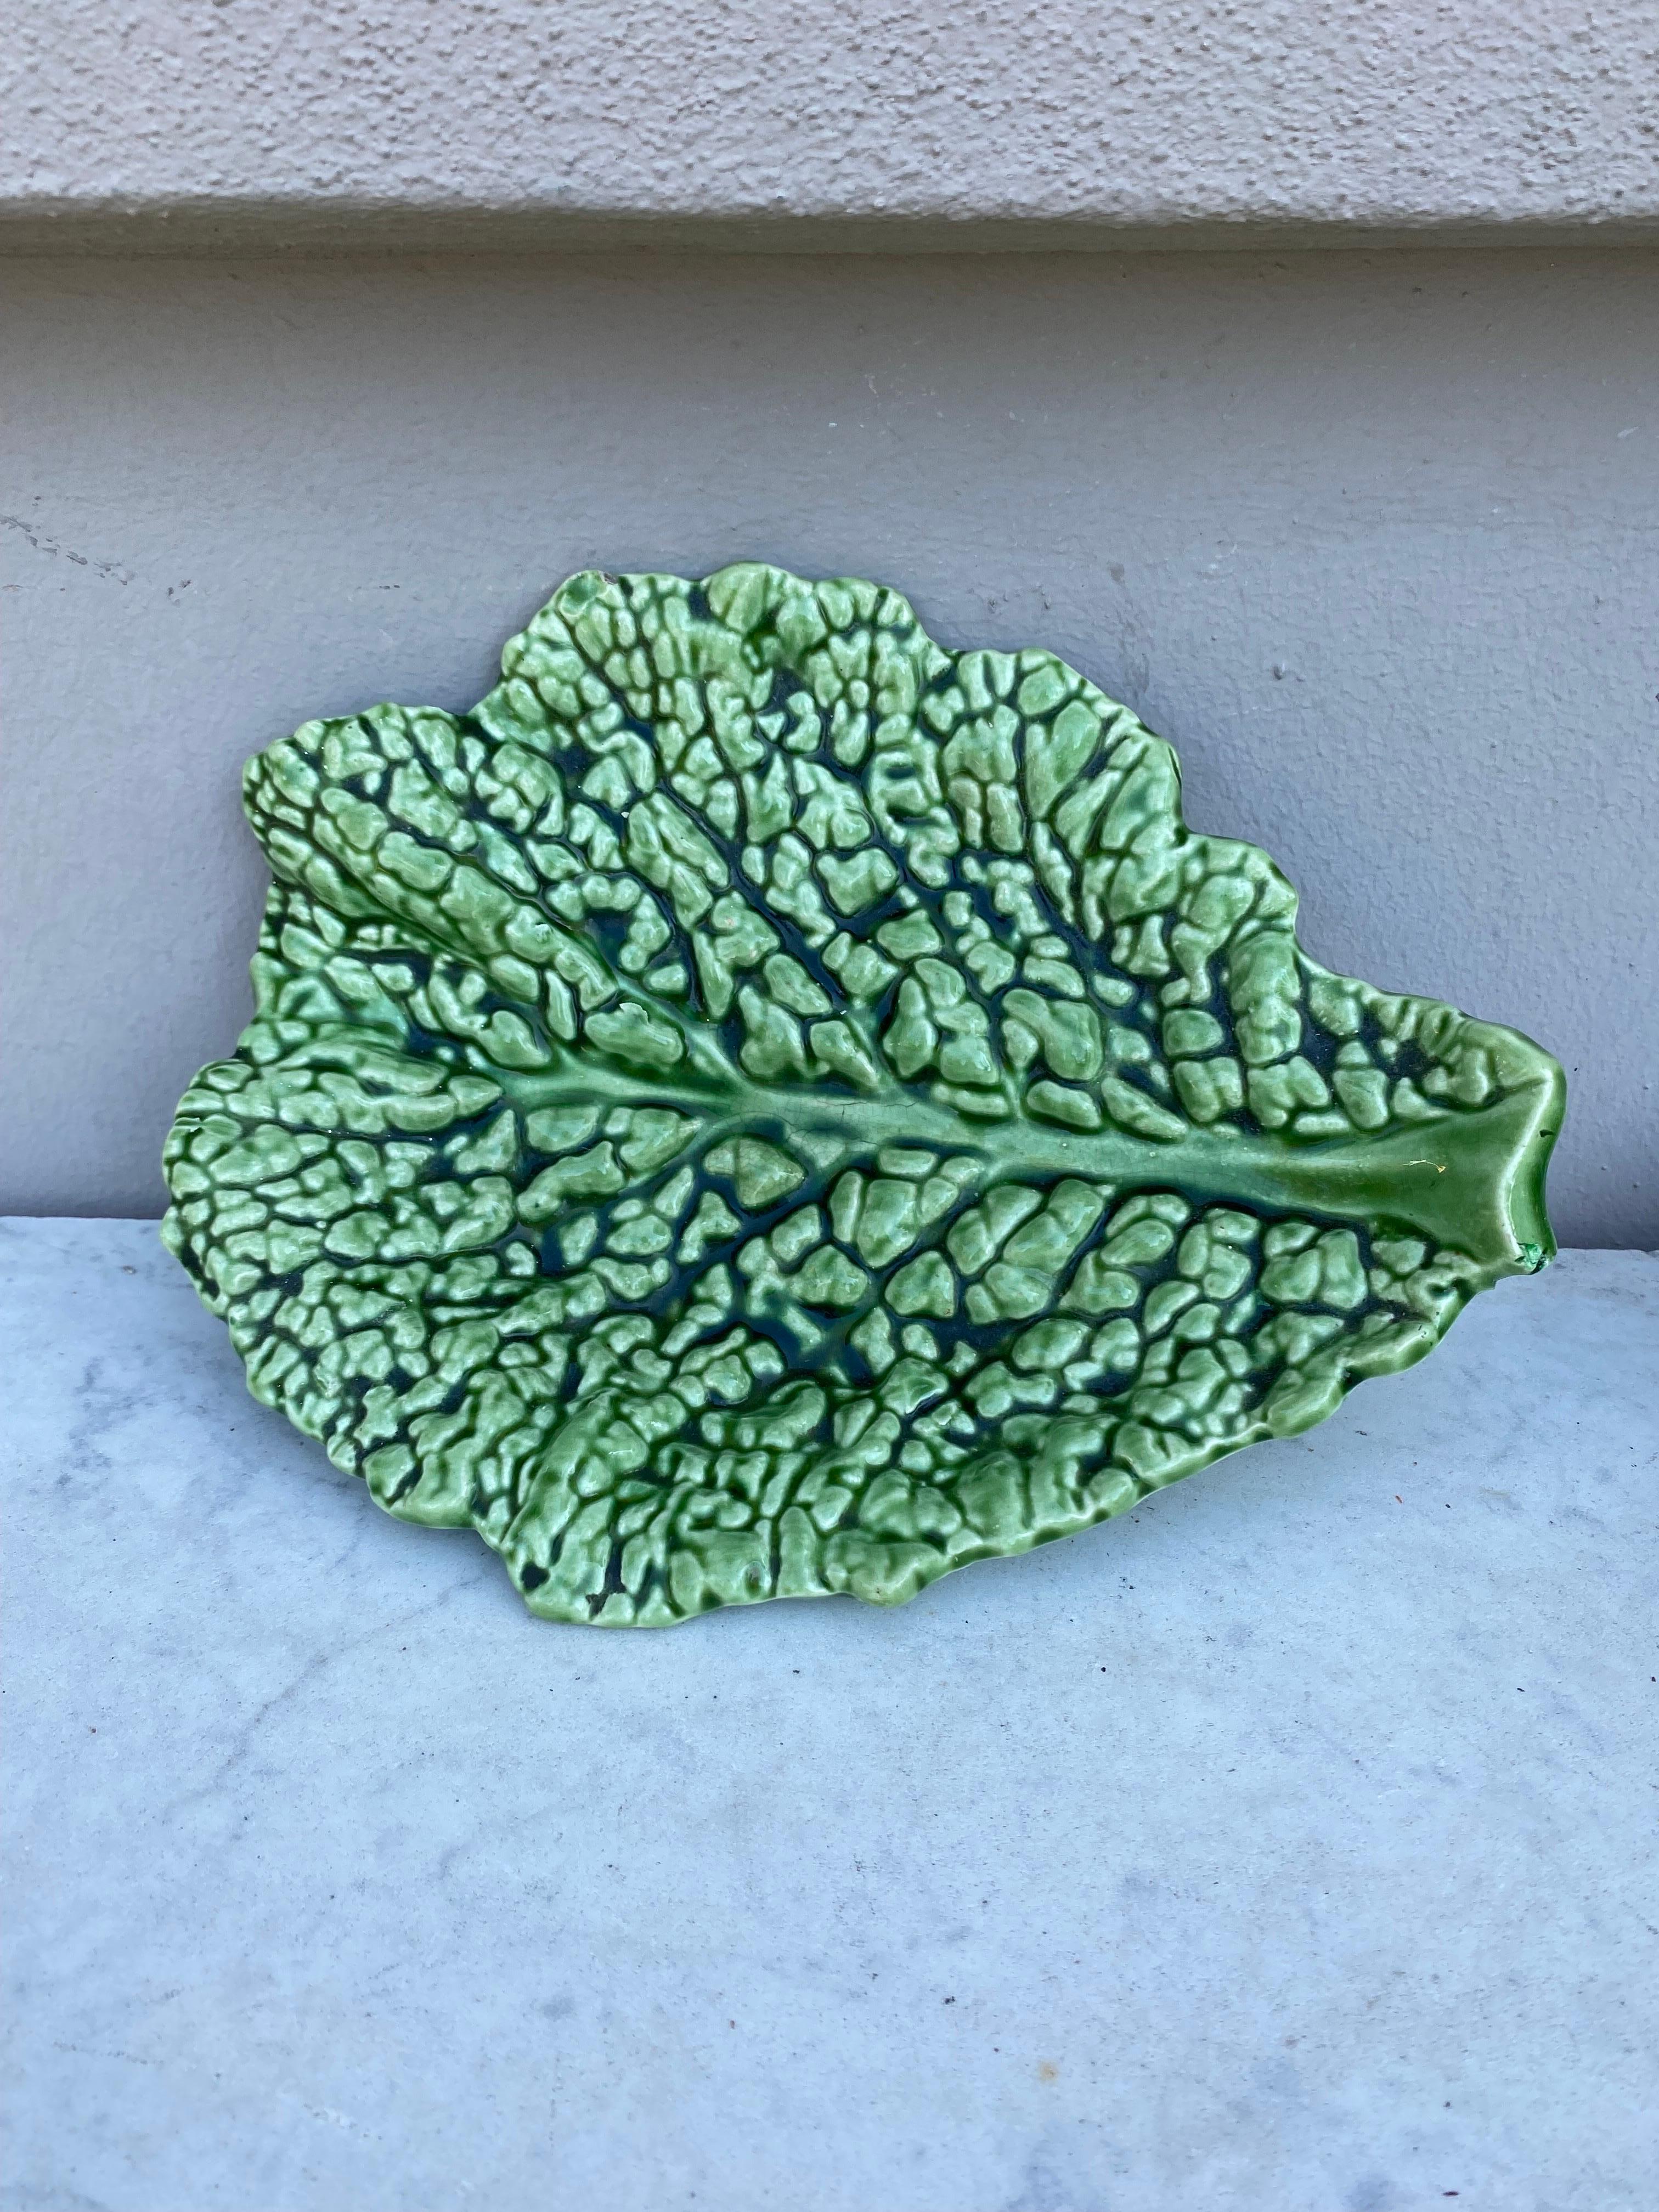 Majolica green cabbage leaf platter Sarreguemines, Circa 1930.
Measures: 10 inches by 7.5 inches.